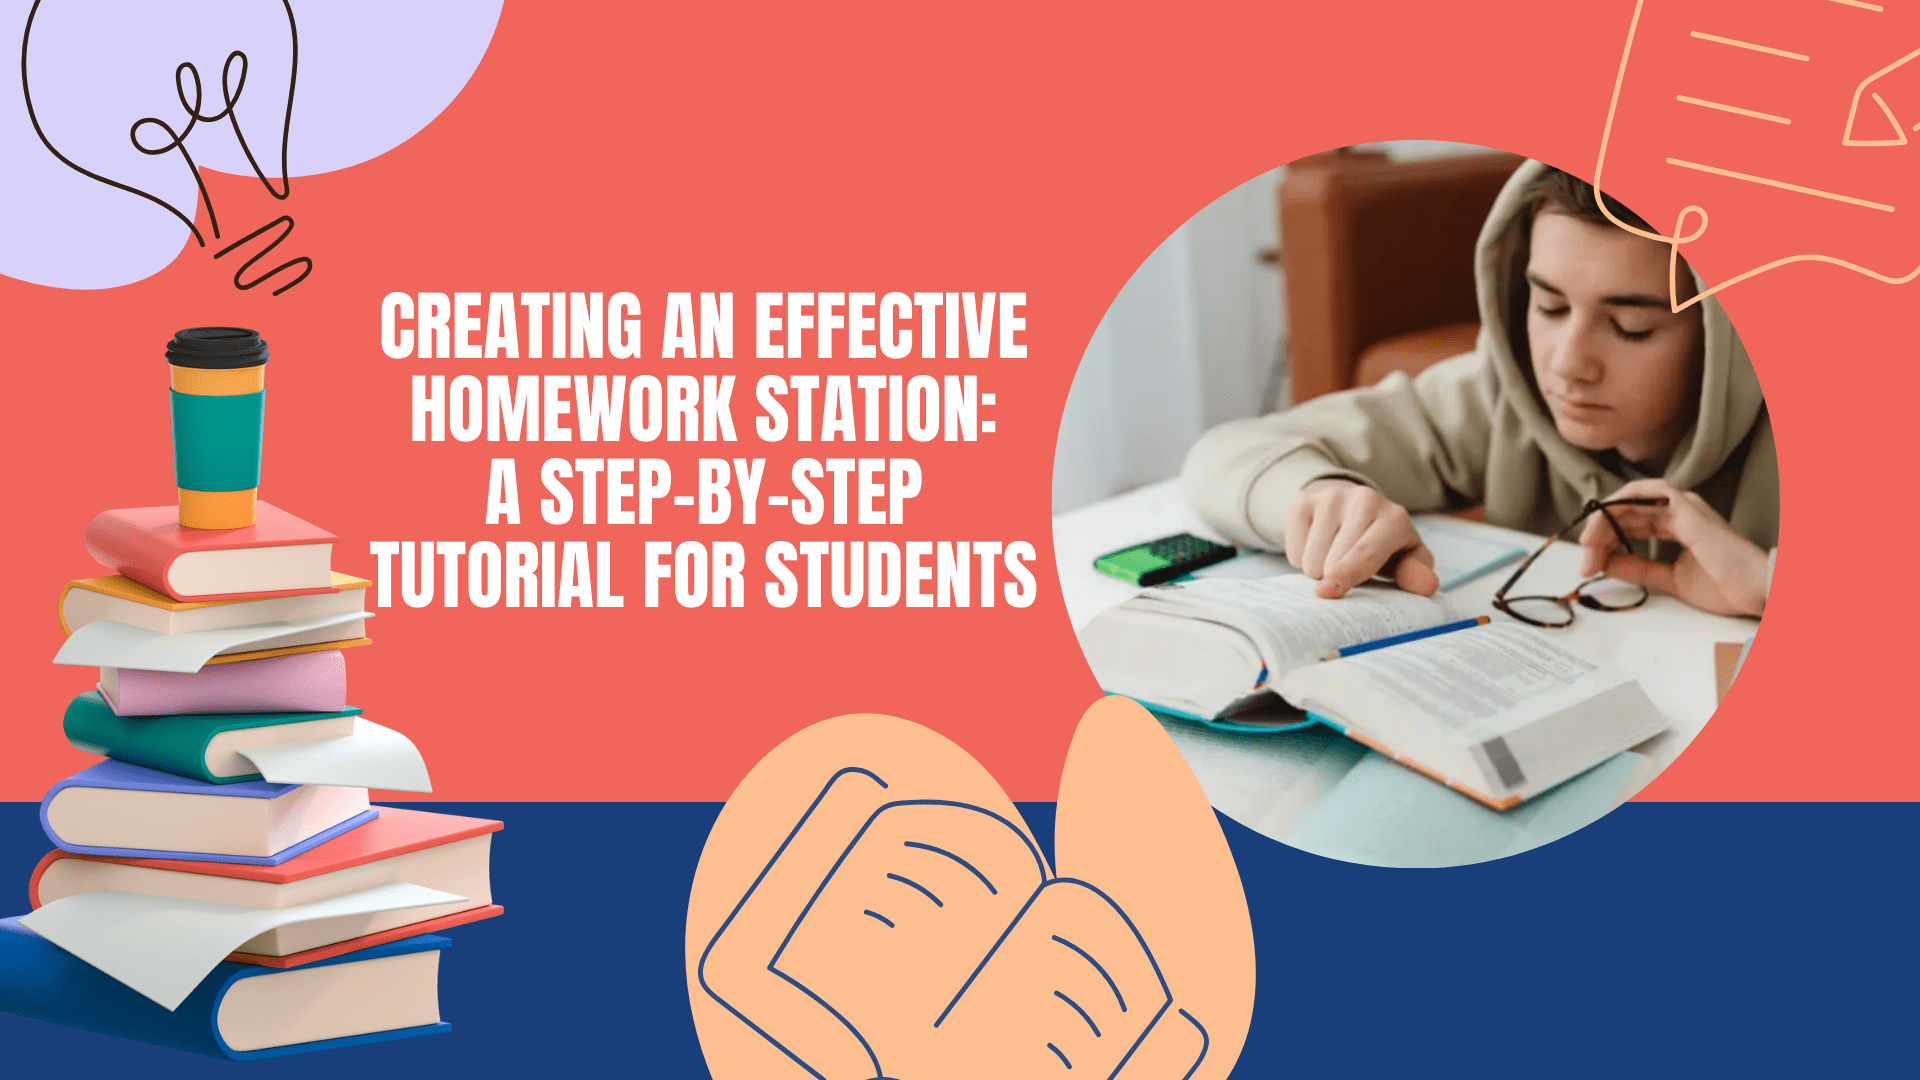 Homework Guide for Students